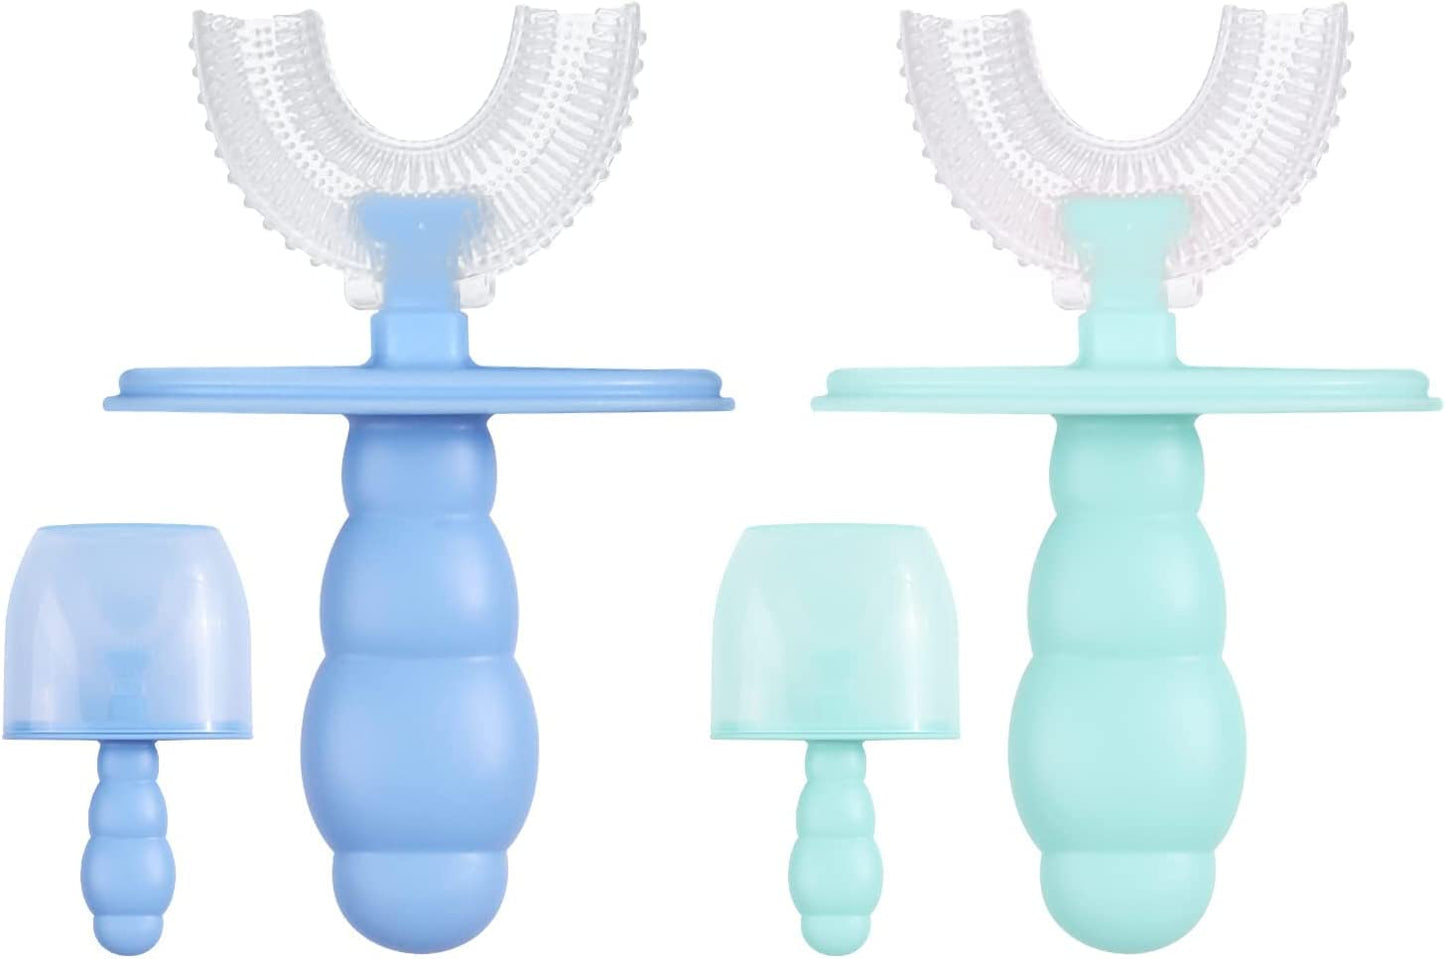 U Shaped Toothbrush Kids, Manual Toothbrush Oral Cleaning Tools Toothbrush for Baby, with Baffle to Prevent swallowing,Toddler Toothbrush for Ages 2-6 Years Old, 2Pack